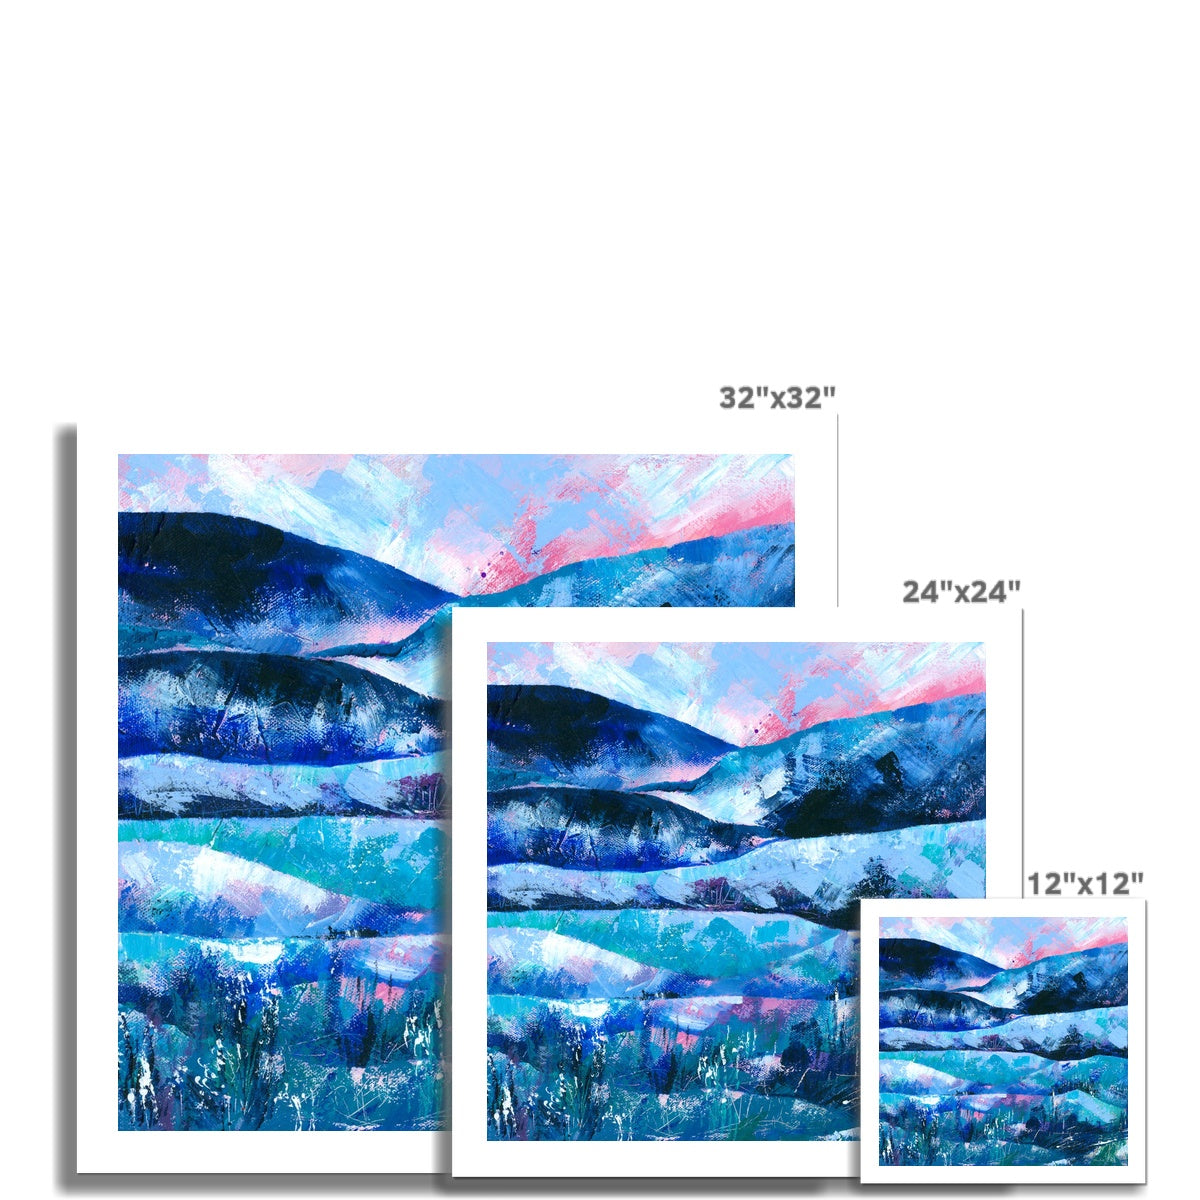 Tranquility square art print shown in different sizes, to scale with one another.